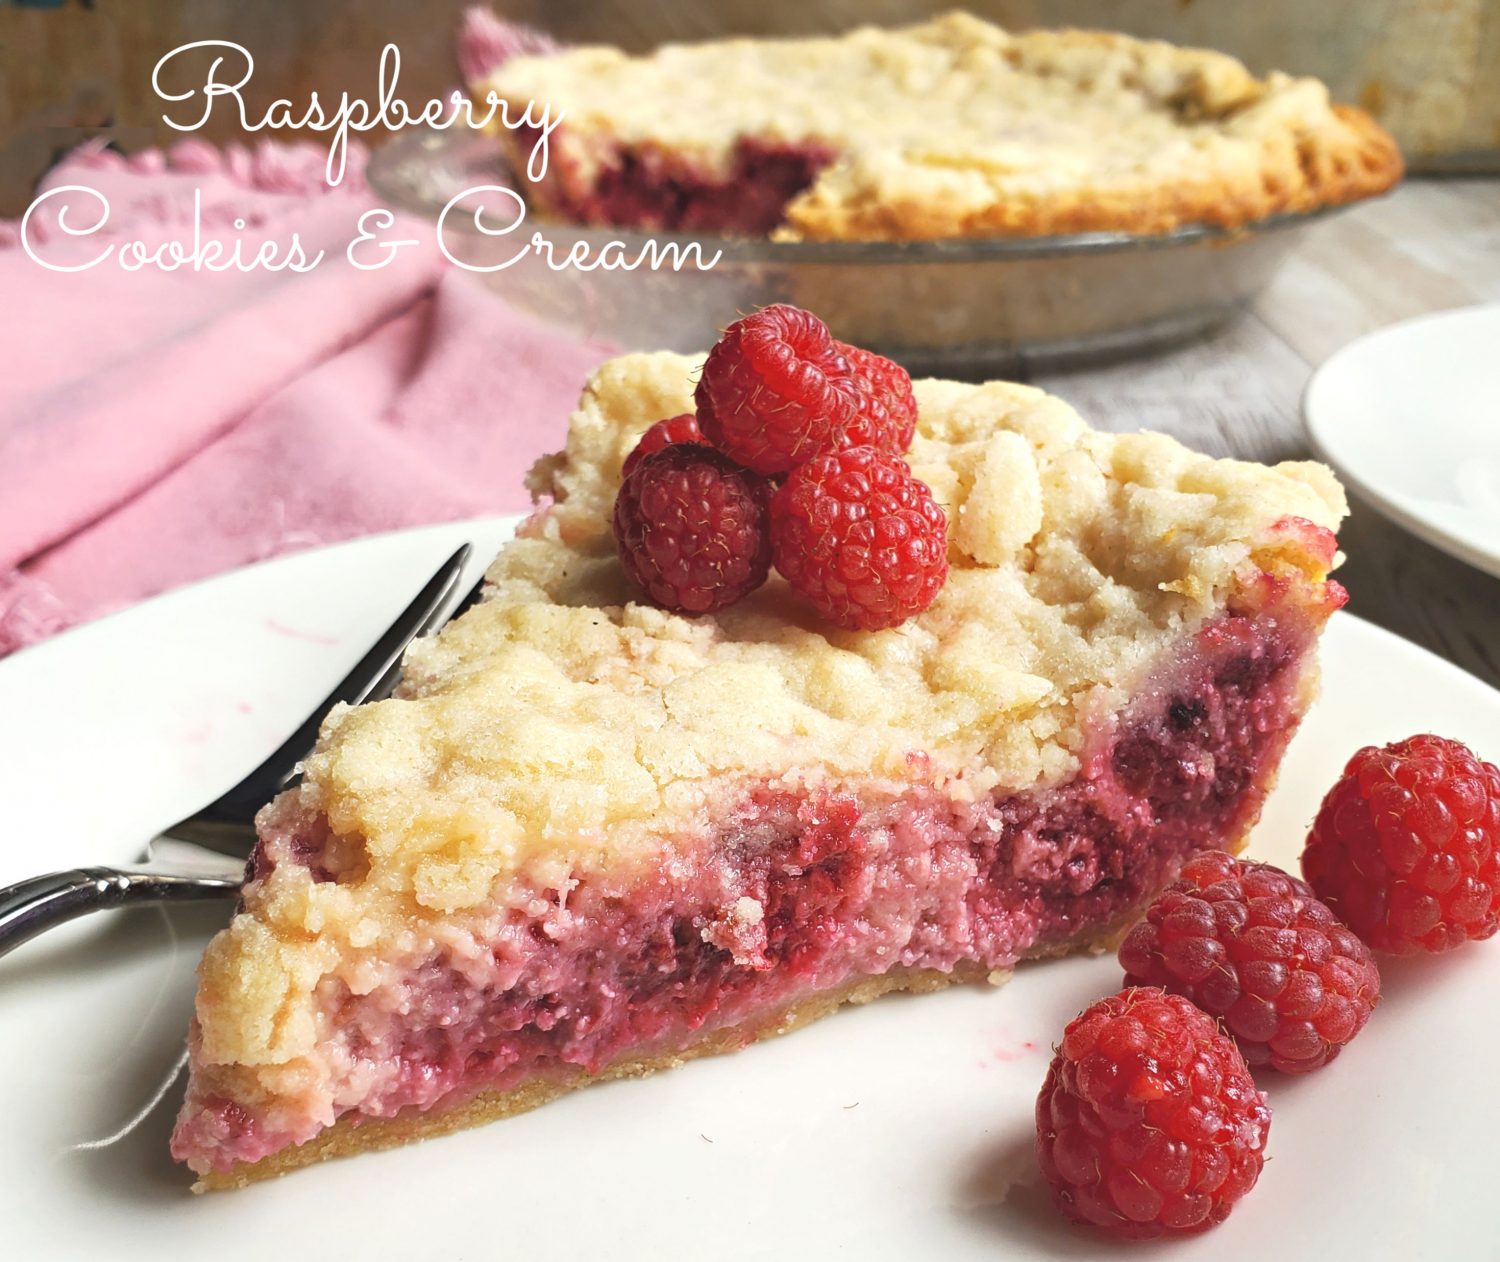 Raspberry Cookies & Cream: A creamy cheesecake-type filling with fresh raspberries that burst while baking, finished with a sugar cookie topping. 